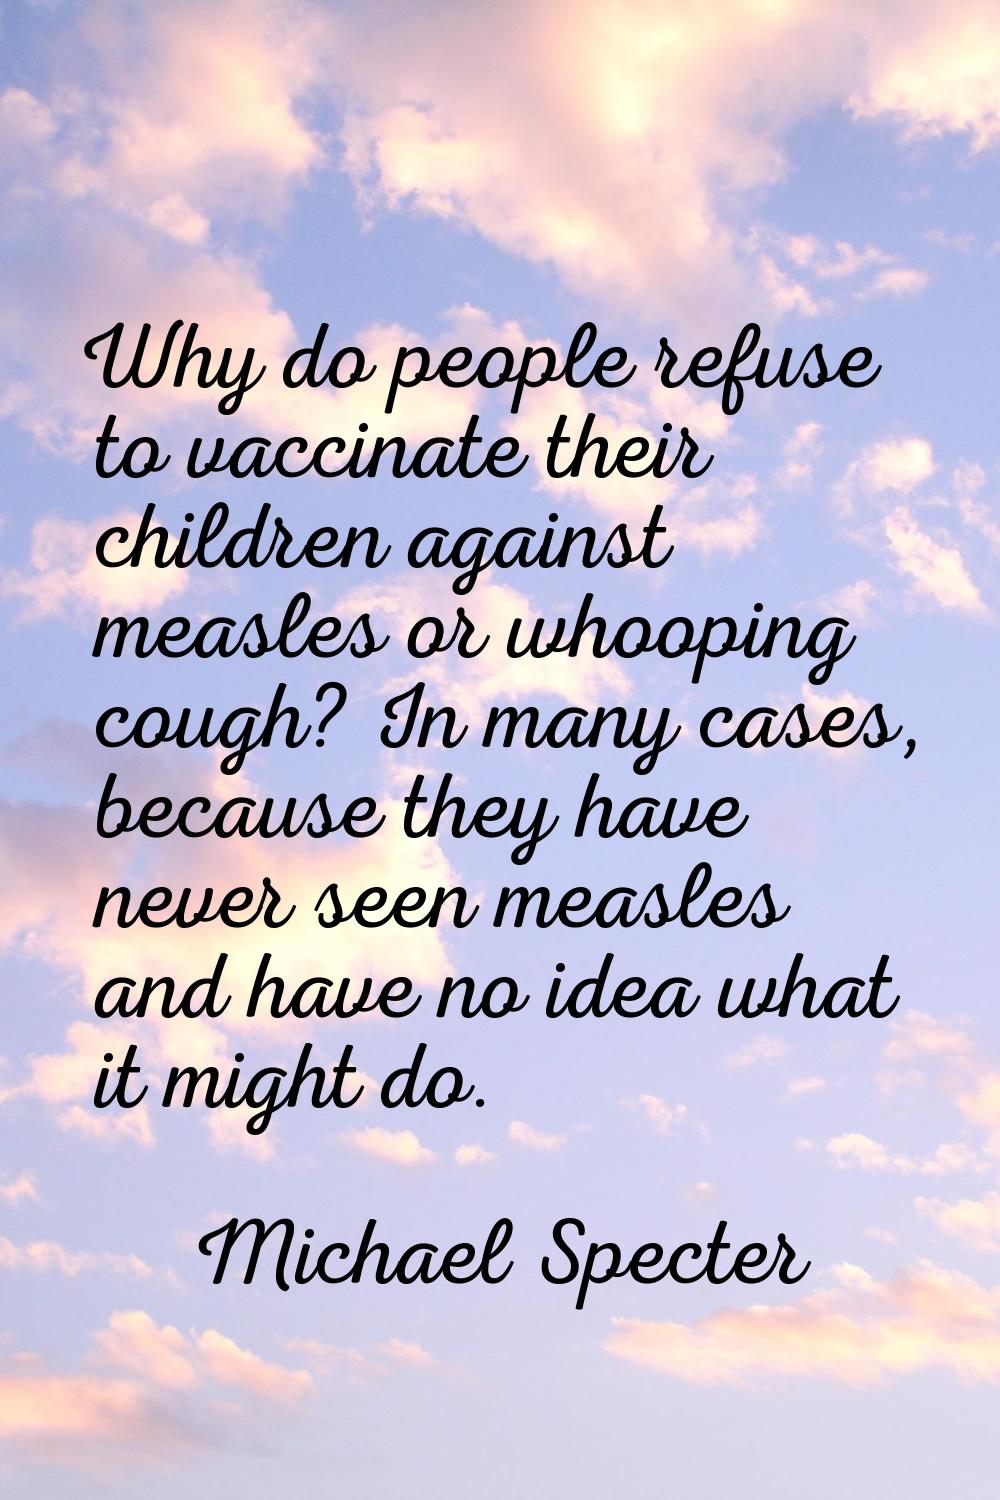 Why do people refuse to vaccinate their children against measles or whooping cough? In many cases, 